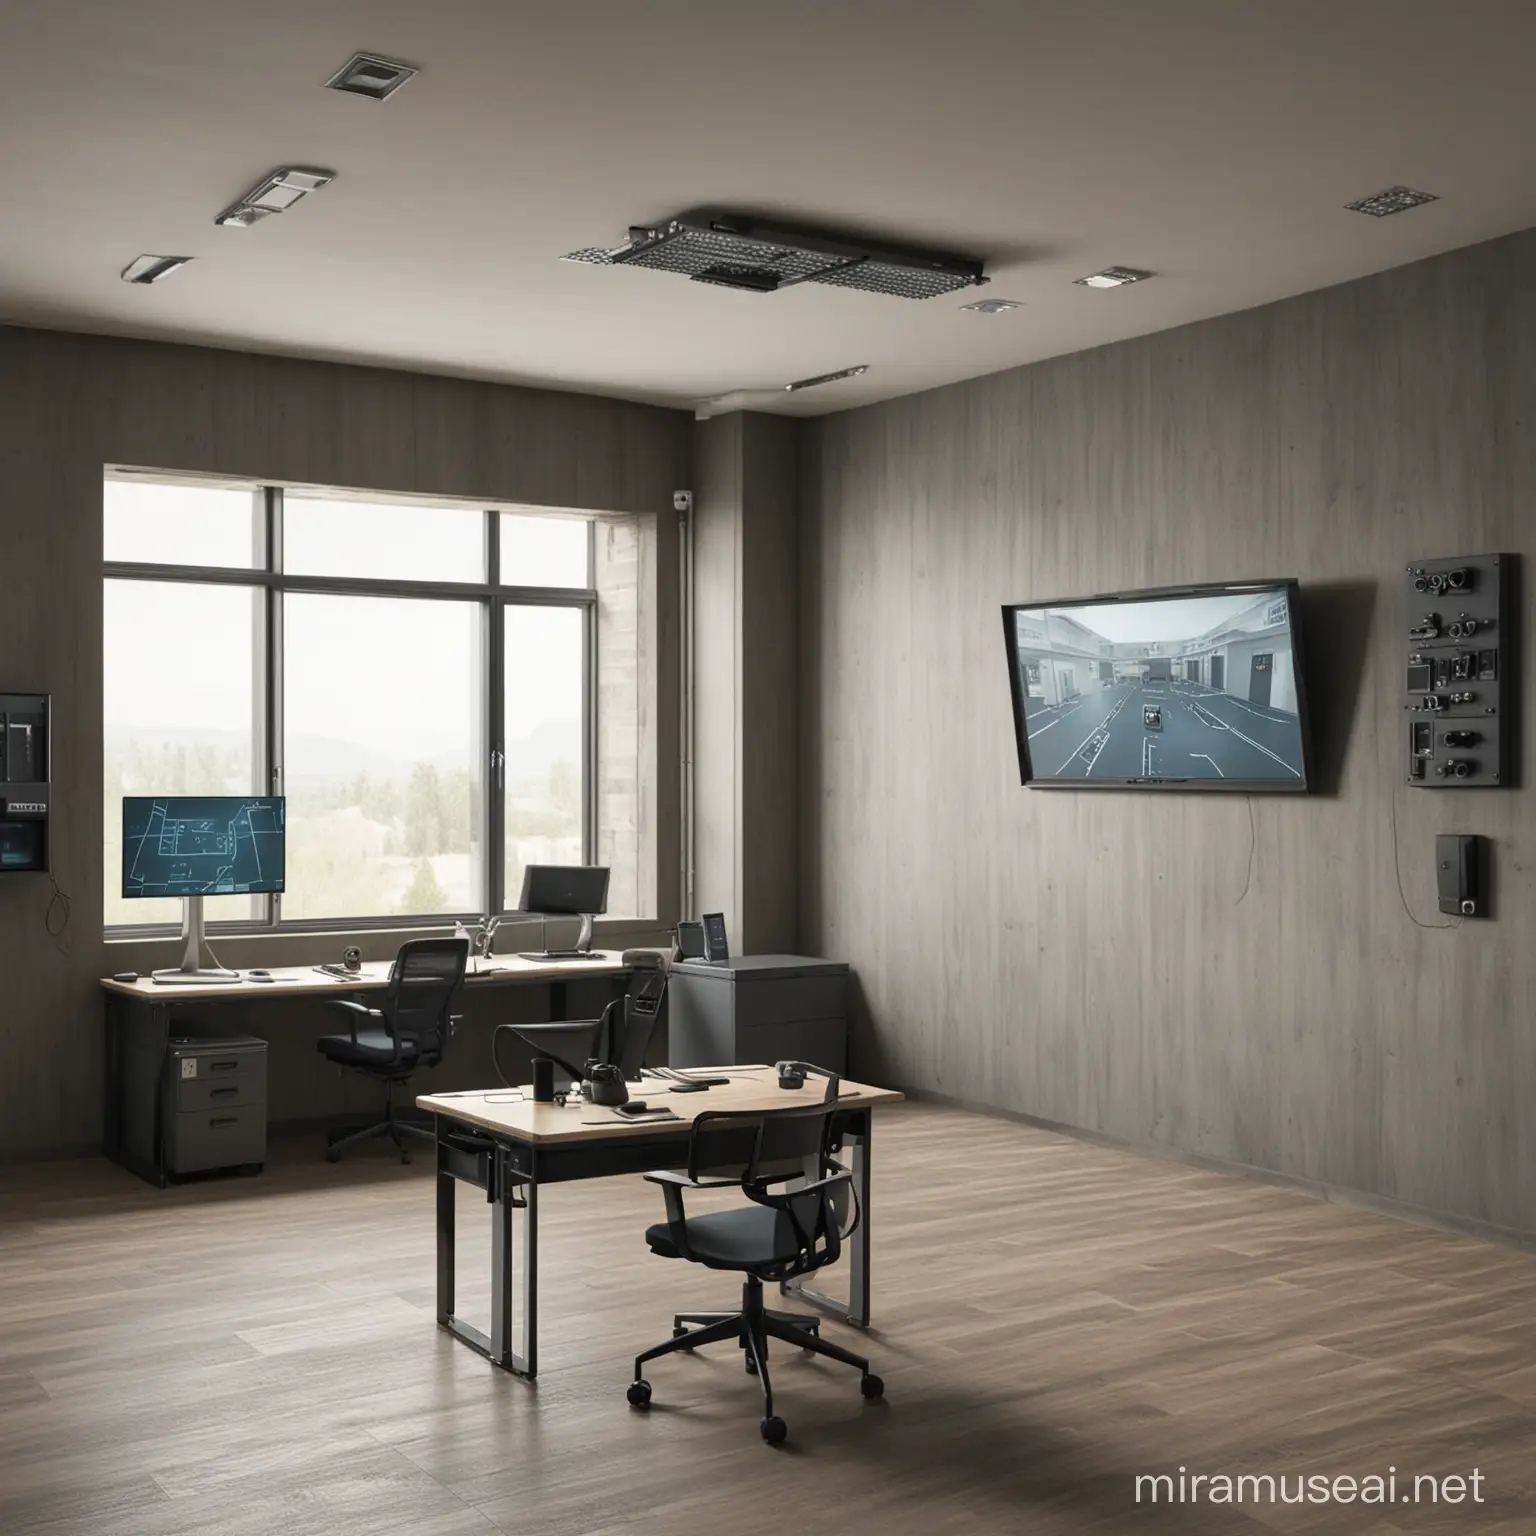 empty room in a safe house for intelligence agency; realistic room with monitors and cameras; surveillance devices; automatic weapons ready for use by window, 